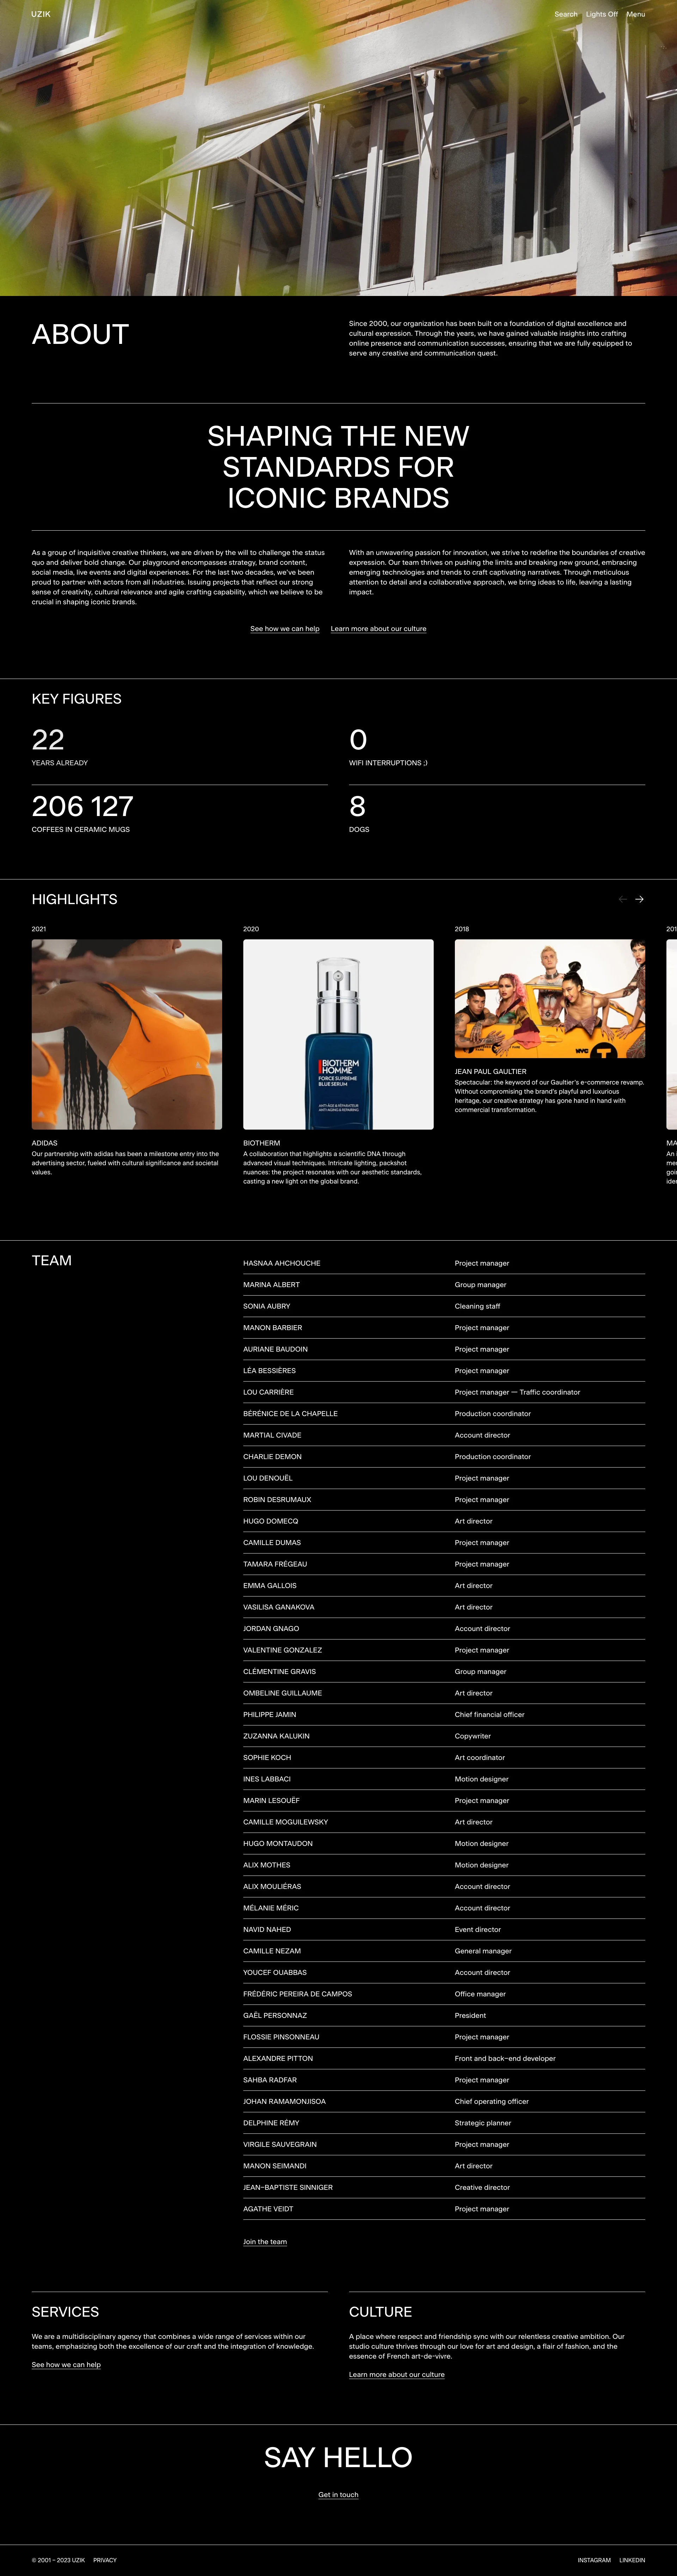 UZIK Landing Page Example: Shaping the new standards for iconic brands. Since 2000, our organization has been built on a foundation of digital excellence and cultural expression. Through the years, we have gained valuable insights into crafting online presence and communication successes, ensuring that we are fully equipped to serve any creative and communication quest.